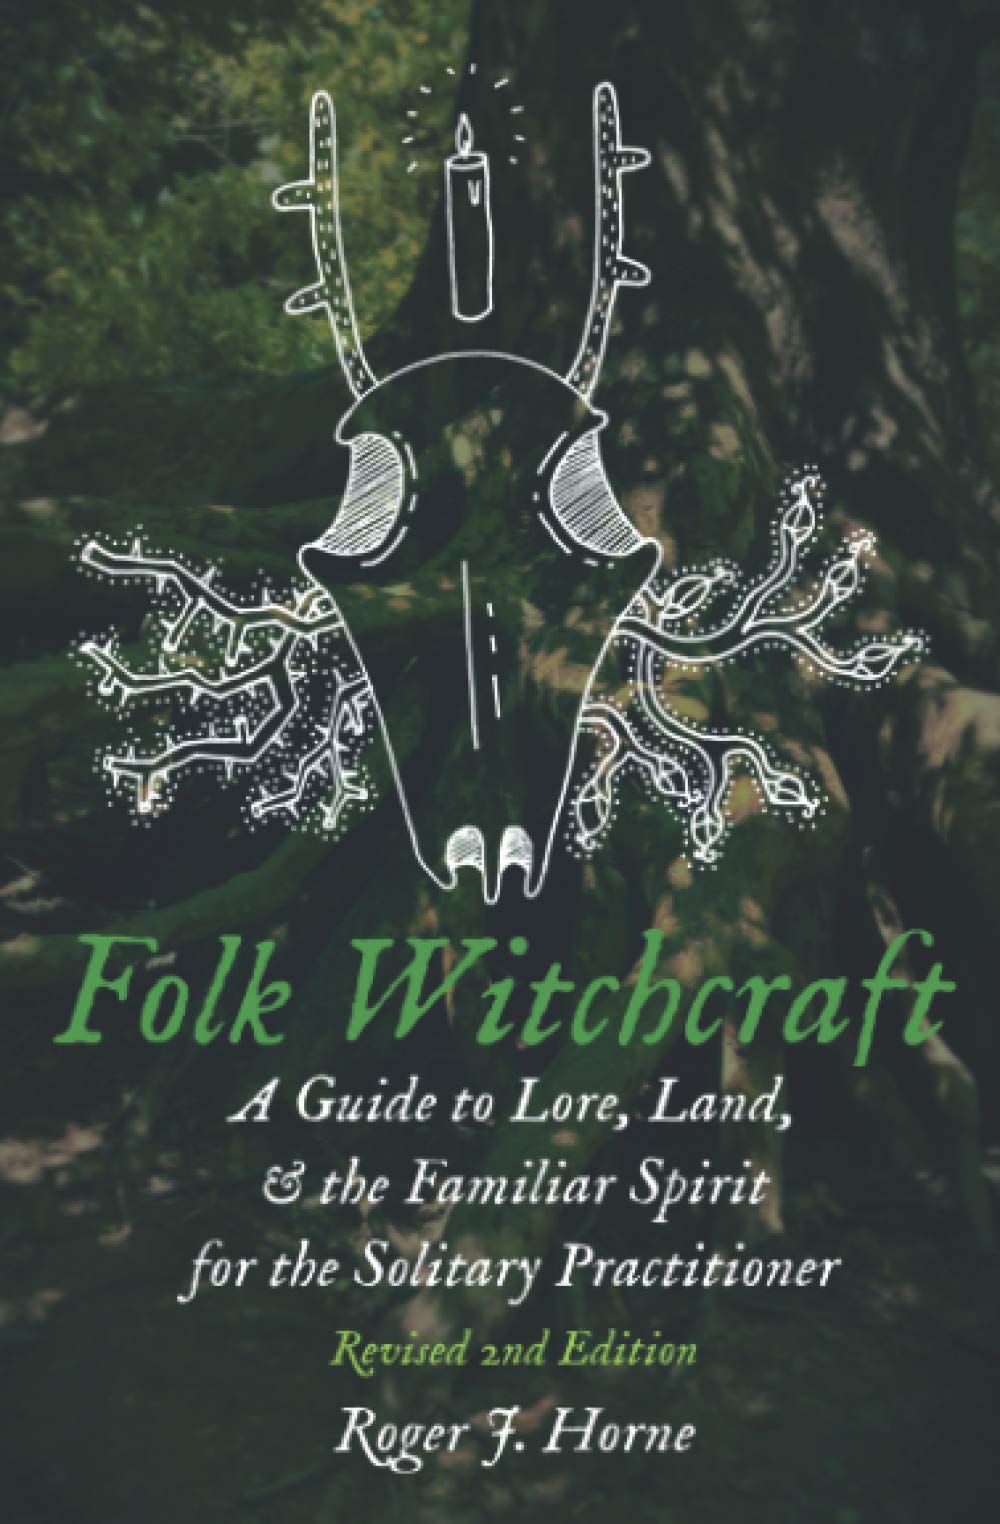 Folk Witchcraft: A Guide to Lore, Land, & the Familiar Spirit